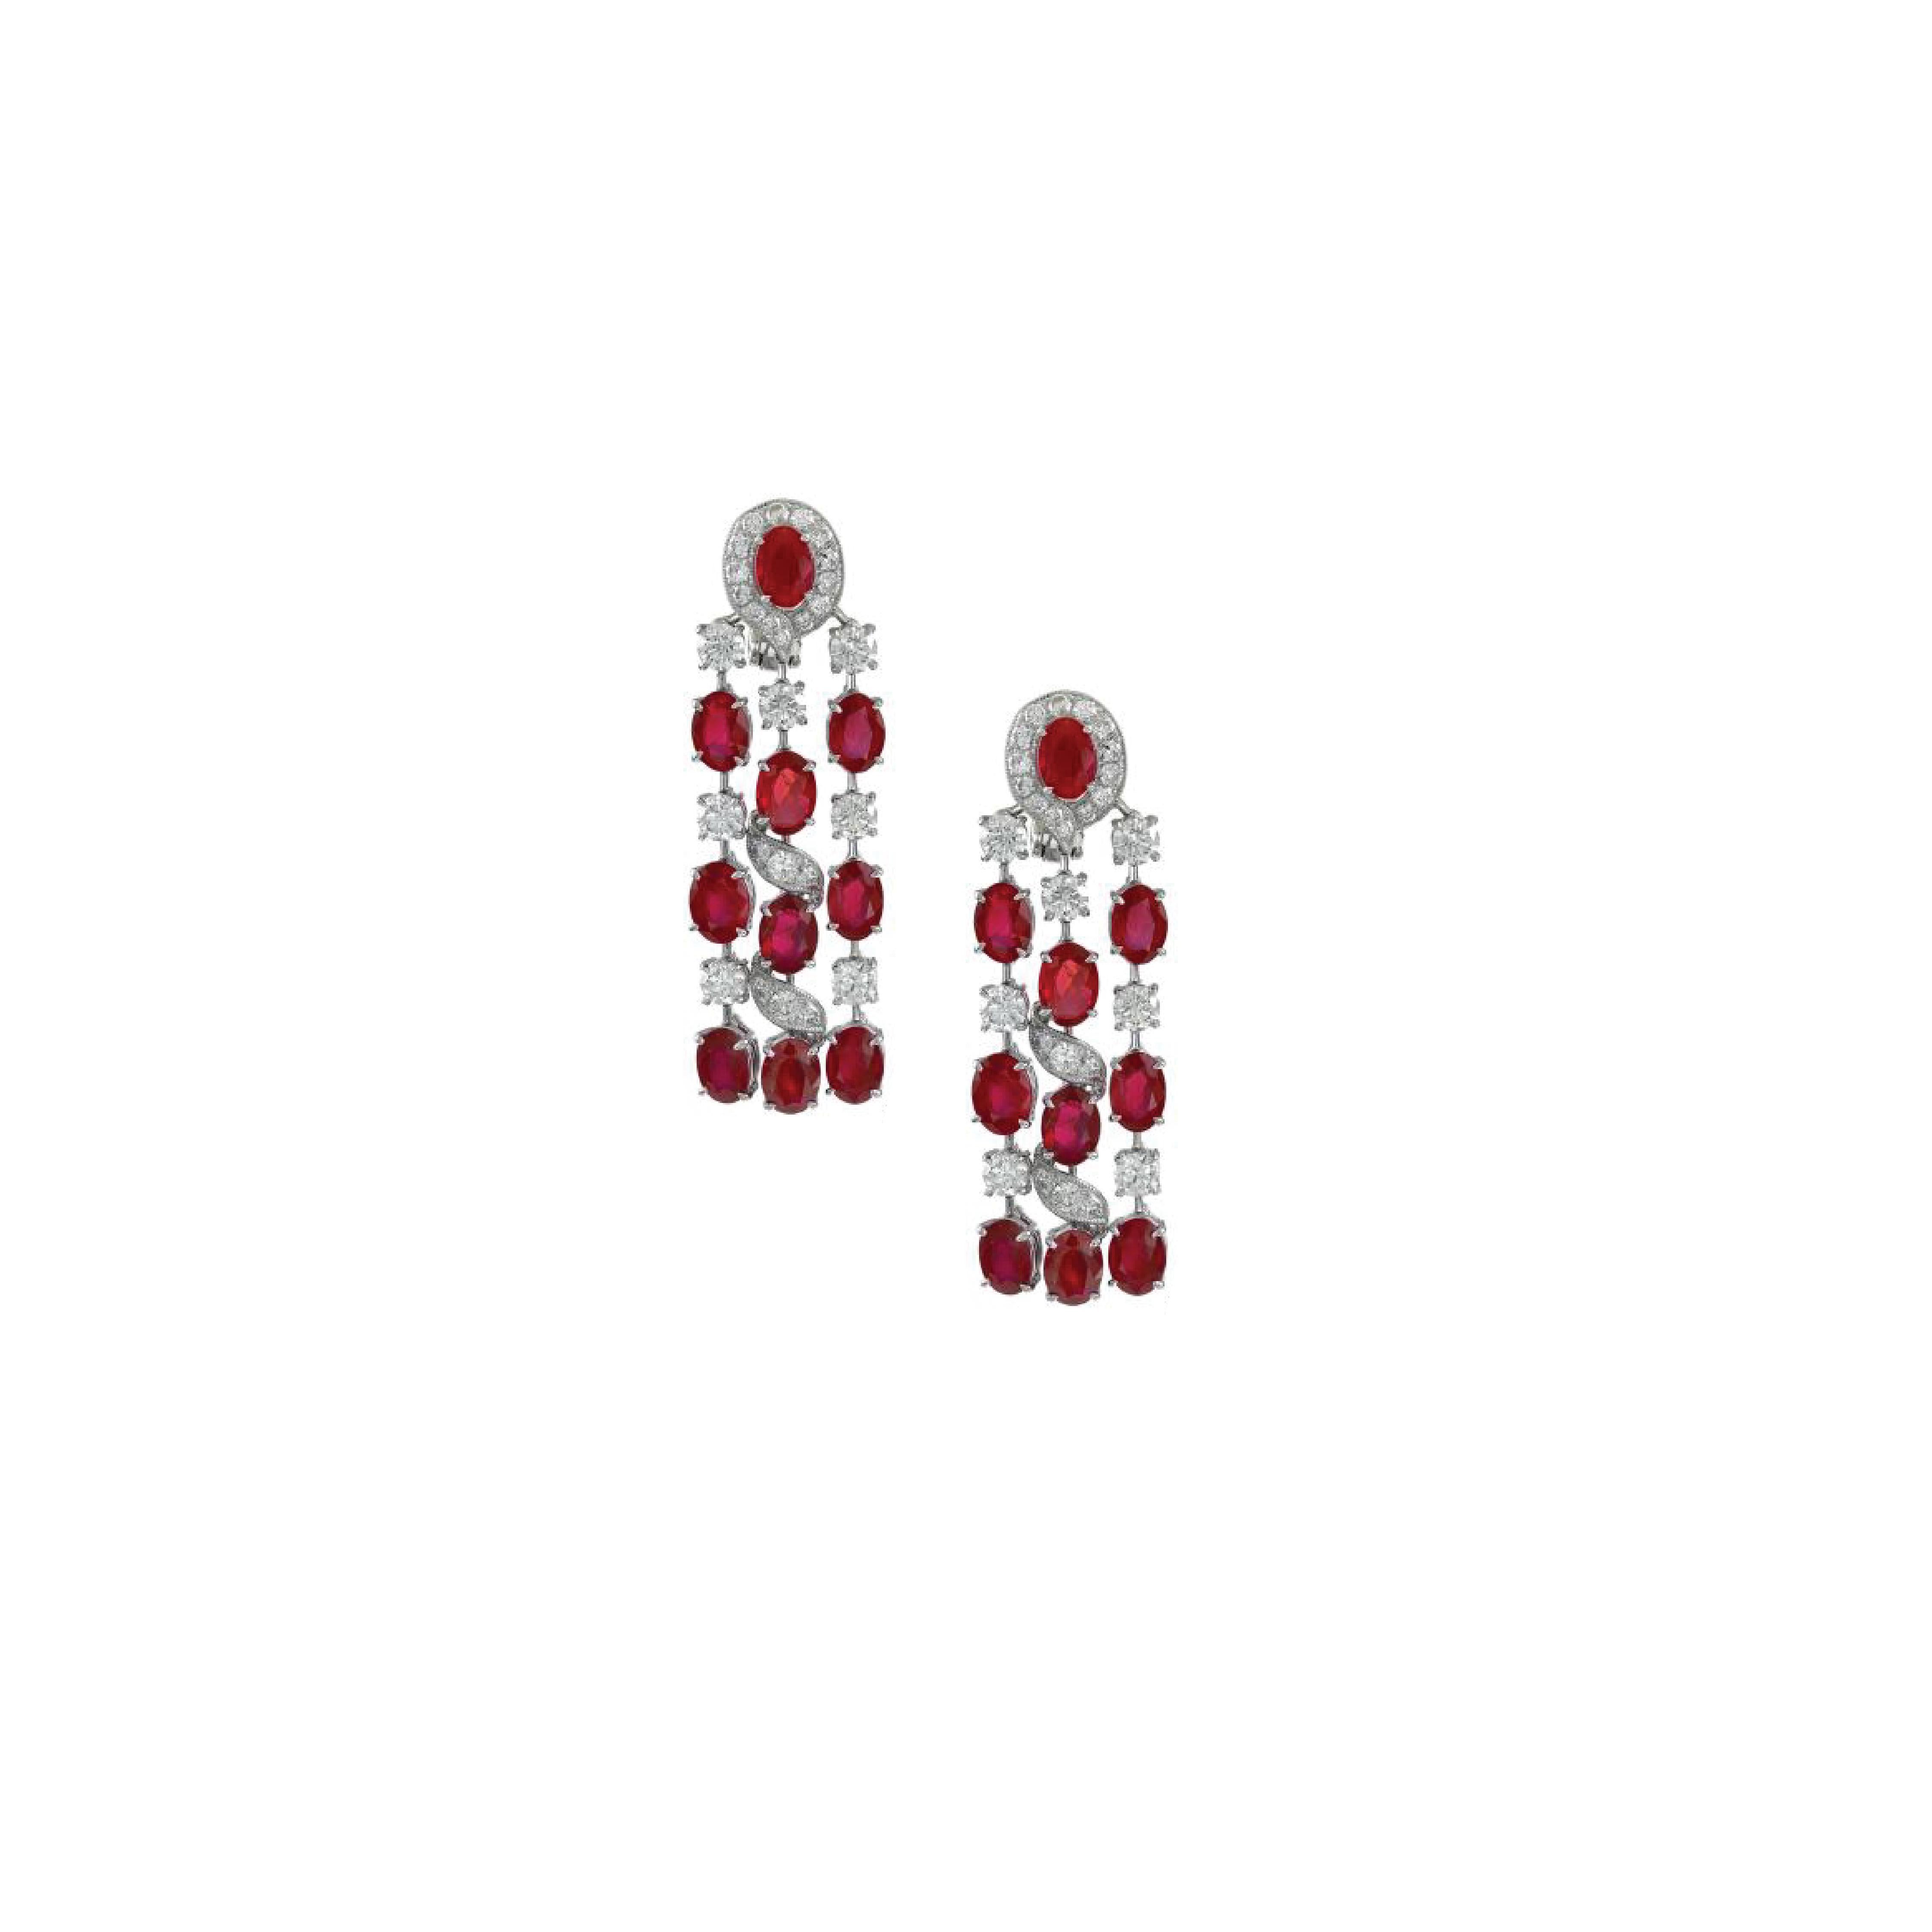 Platinum Set Earrings with Rubies weighing 17.83 carats and Diamonds that weigh 4.94 carats.